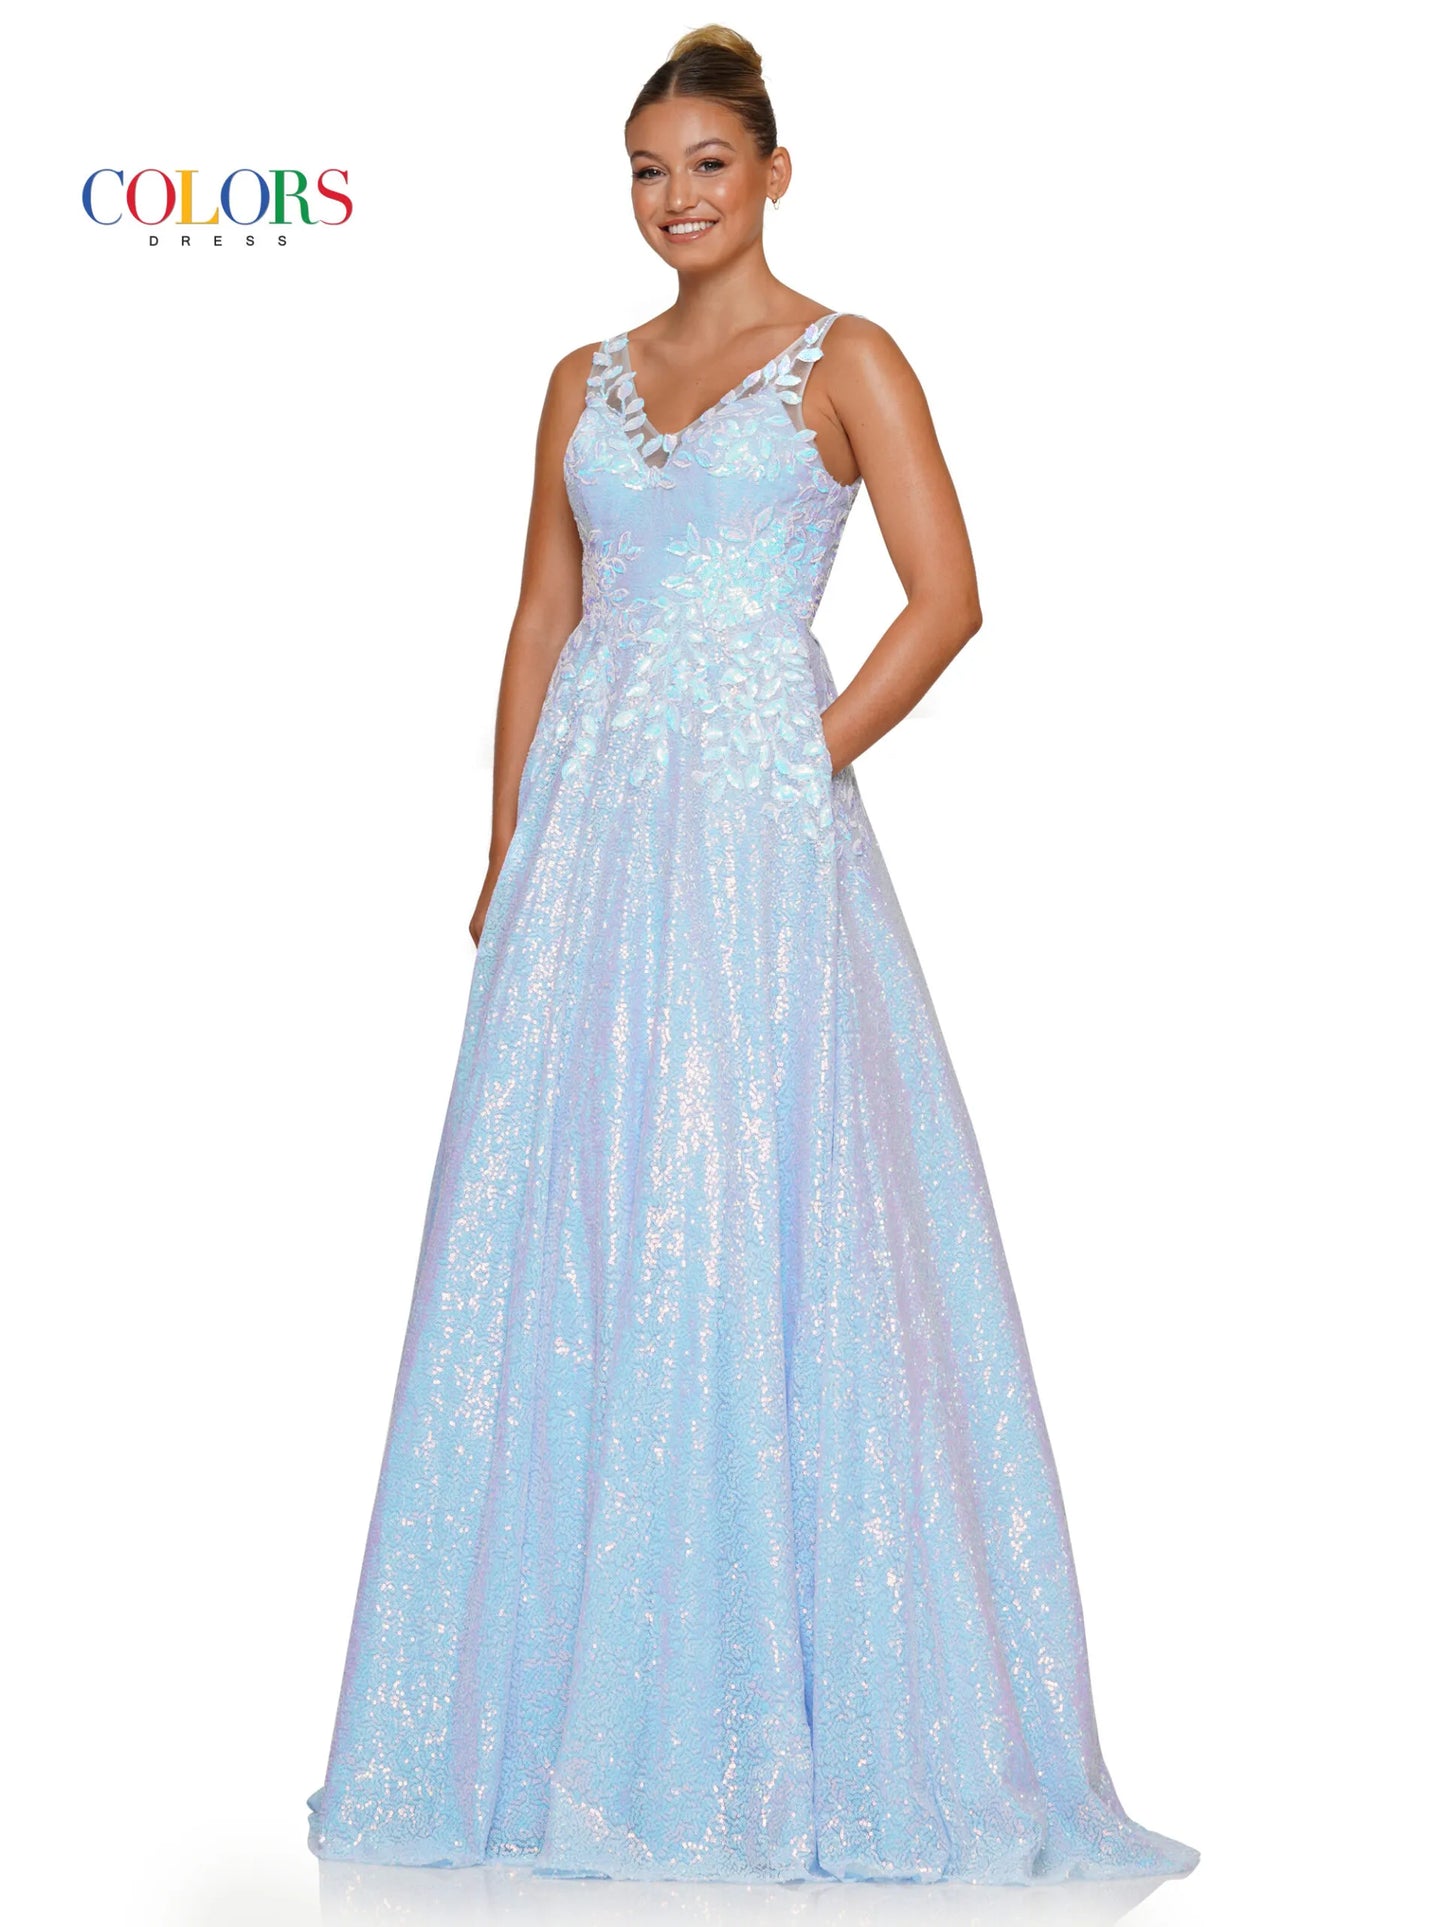 Discover elegance and sophistication with the Colors Dress 3246. This stunning A-Line Prom Dress features striking sequin lace and a flattering V-neckline. The added benefit of pockets makes it perfect for any formal occasion. Complete with a sheer back for a touch of allure.  Sizes: 0-22  Colors: Black, Light Blue, Lavender, Pink